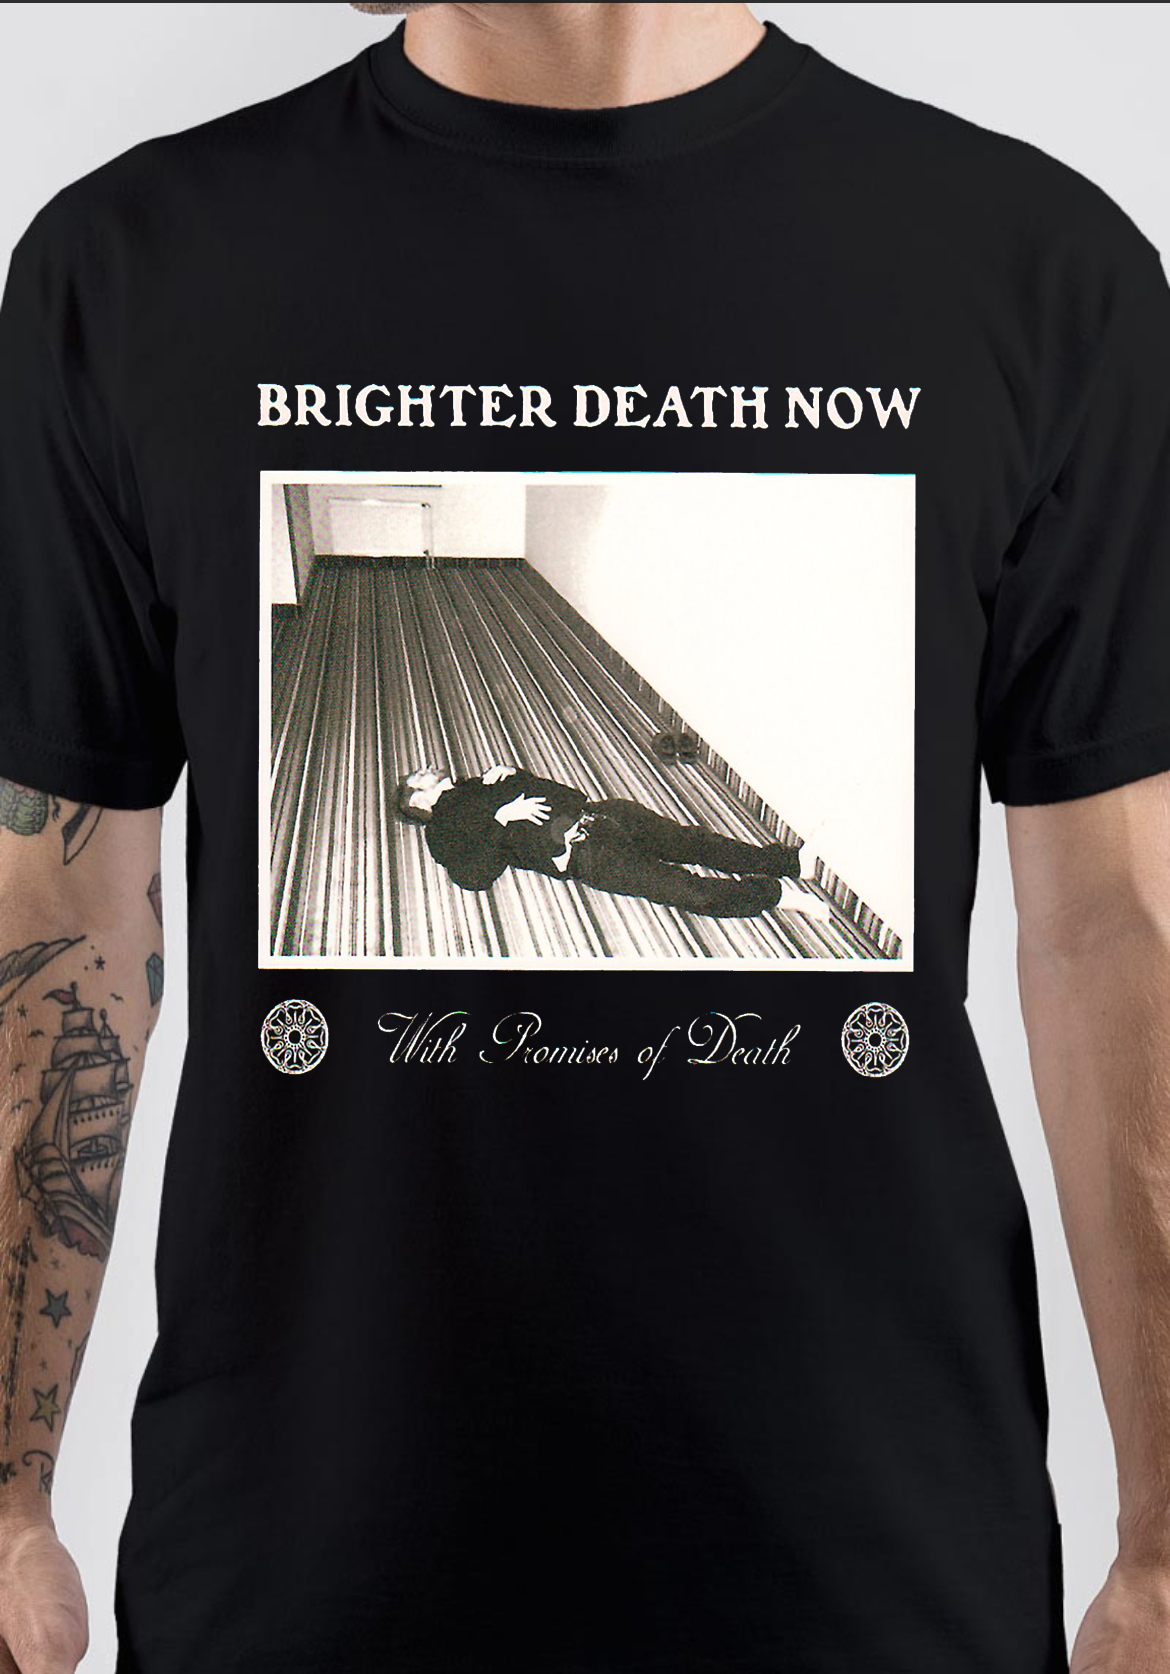 Brighter Death Now T-Shirt And Merchandise